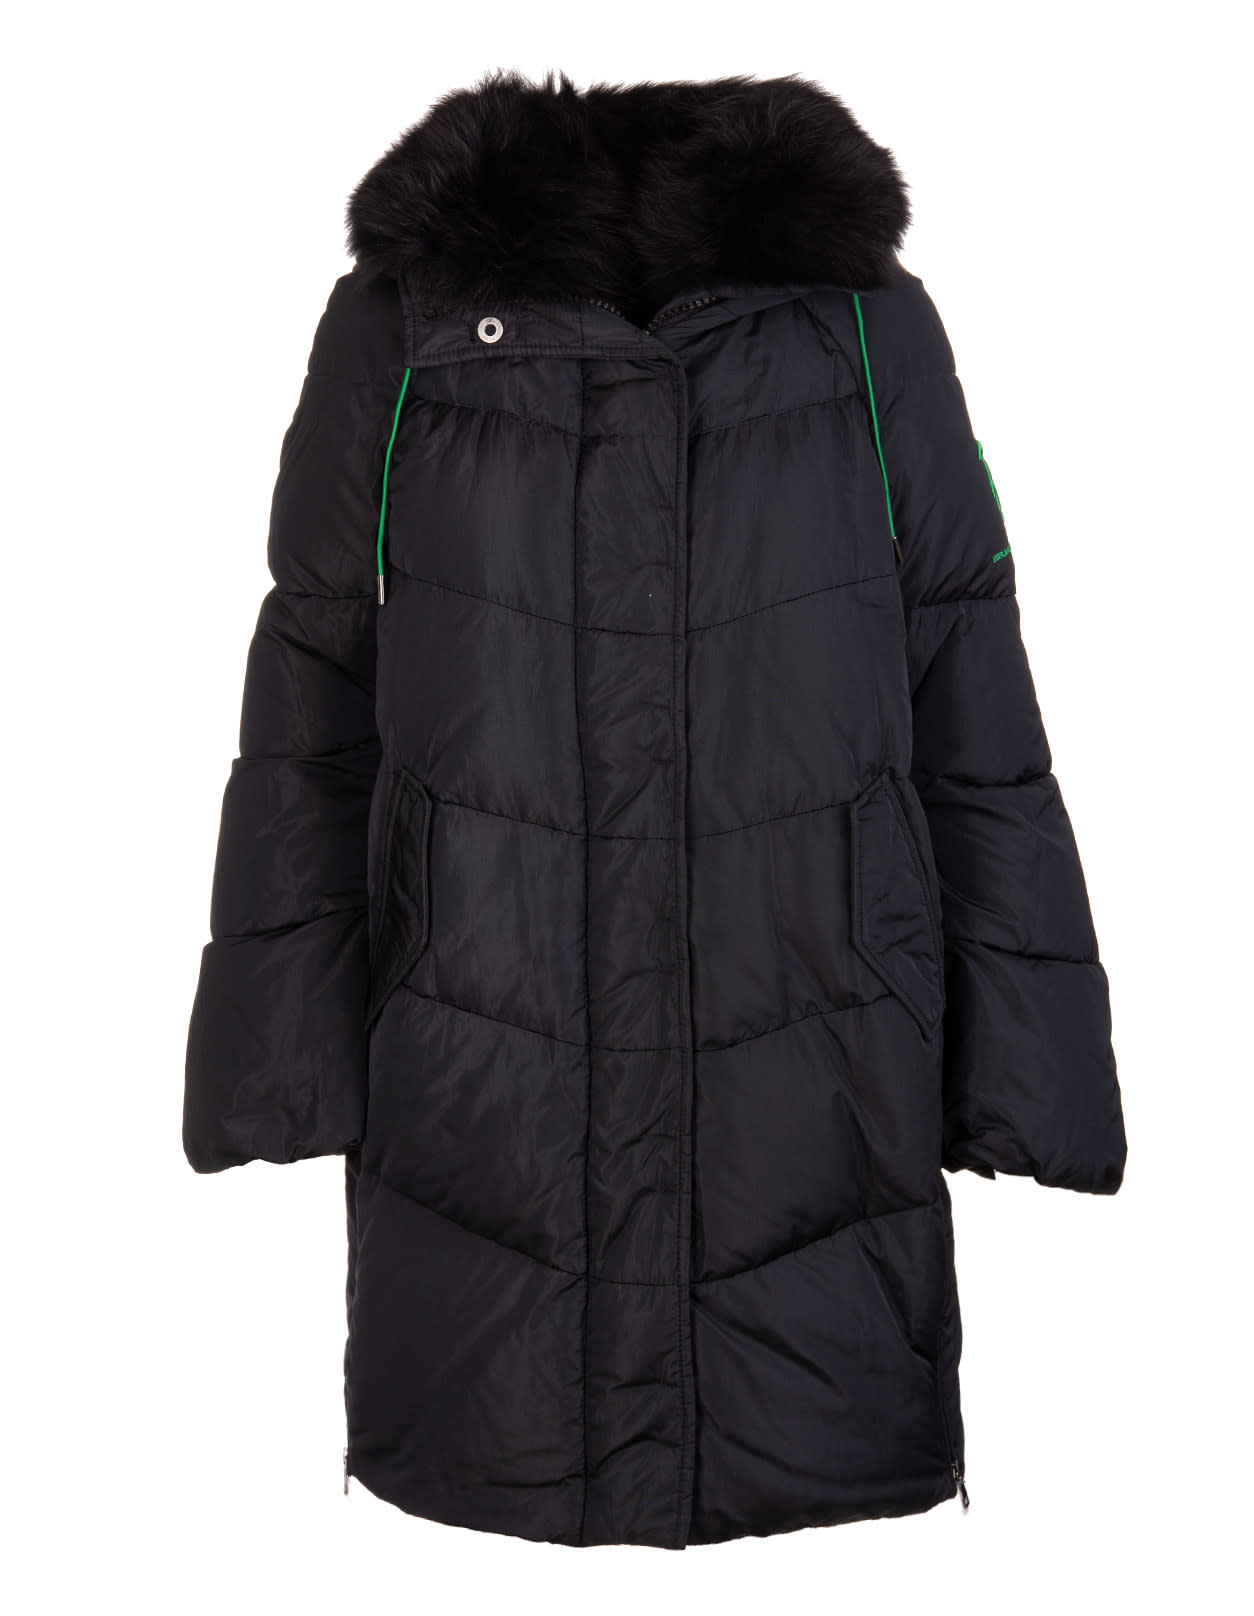 Ermanno Scervino Long Black And Green Down Jacket With Fox Fur